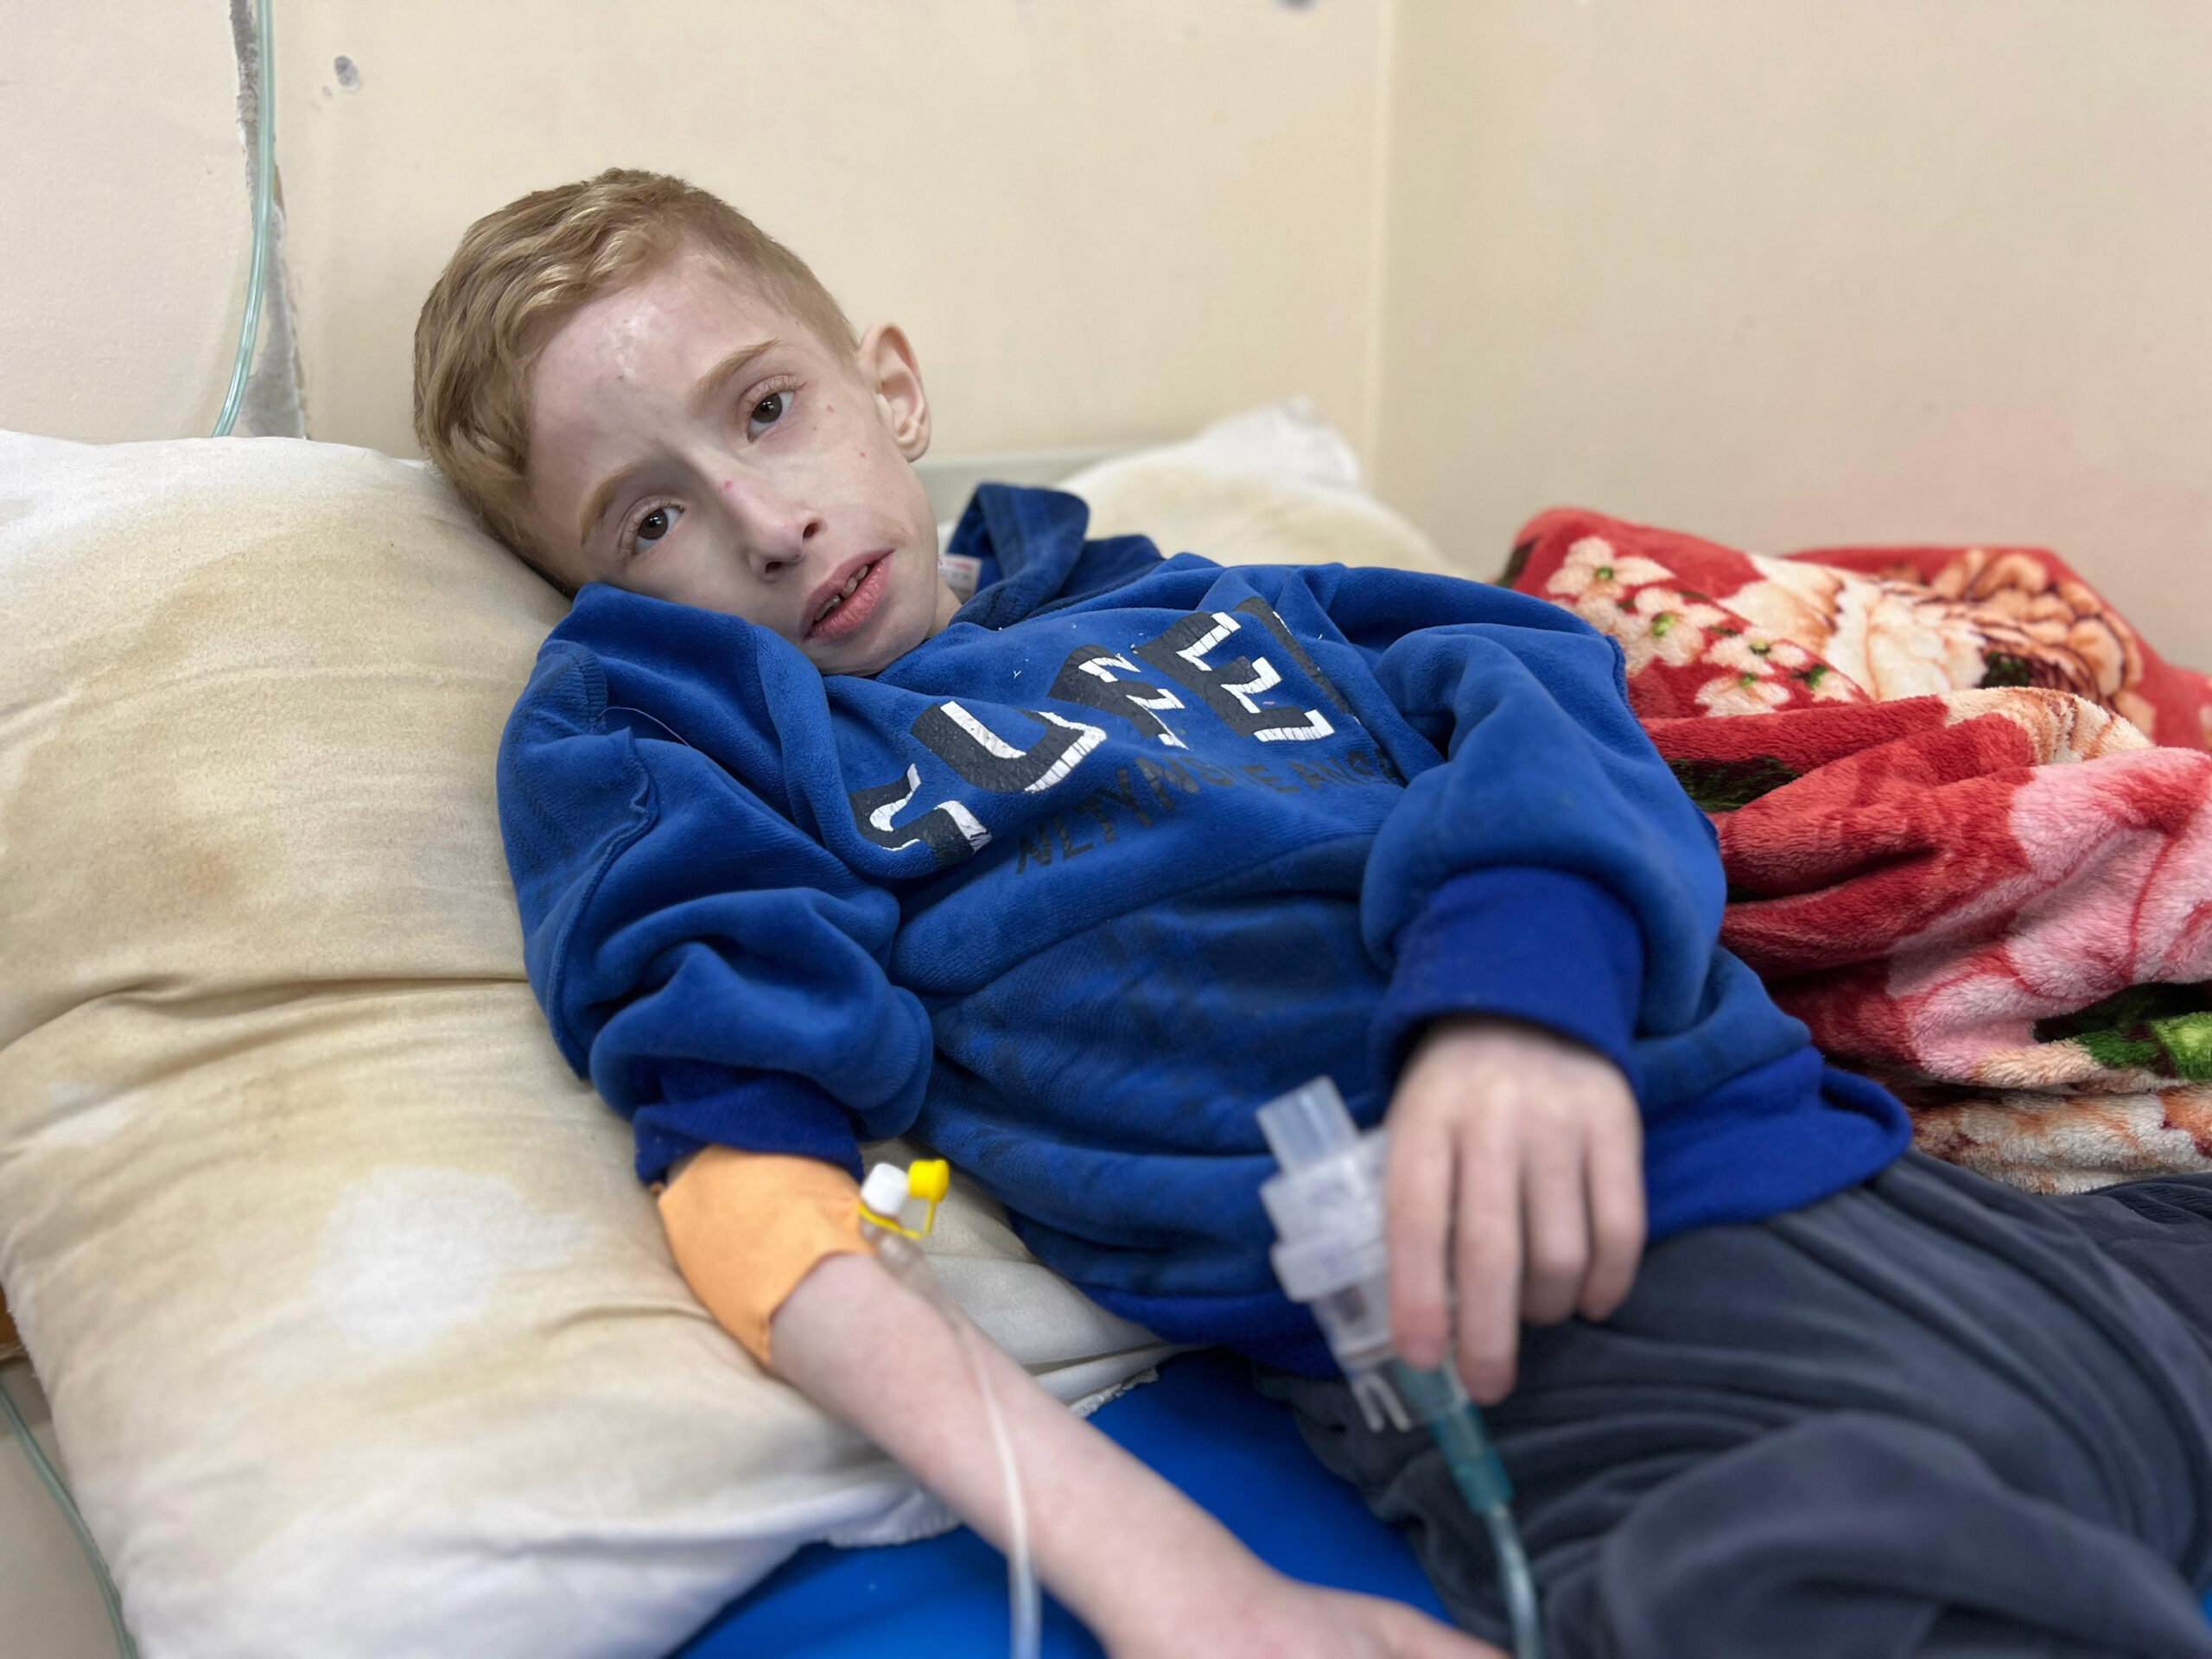 Relative of Palestinian boy facing starvation in northern Gaza says “there is no treatment” for him